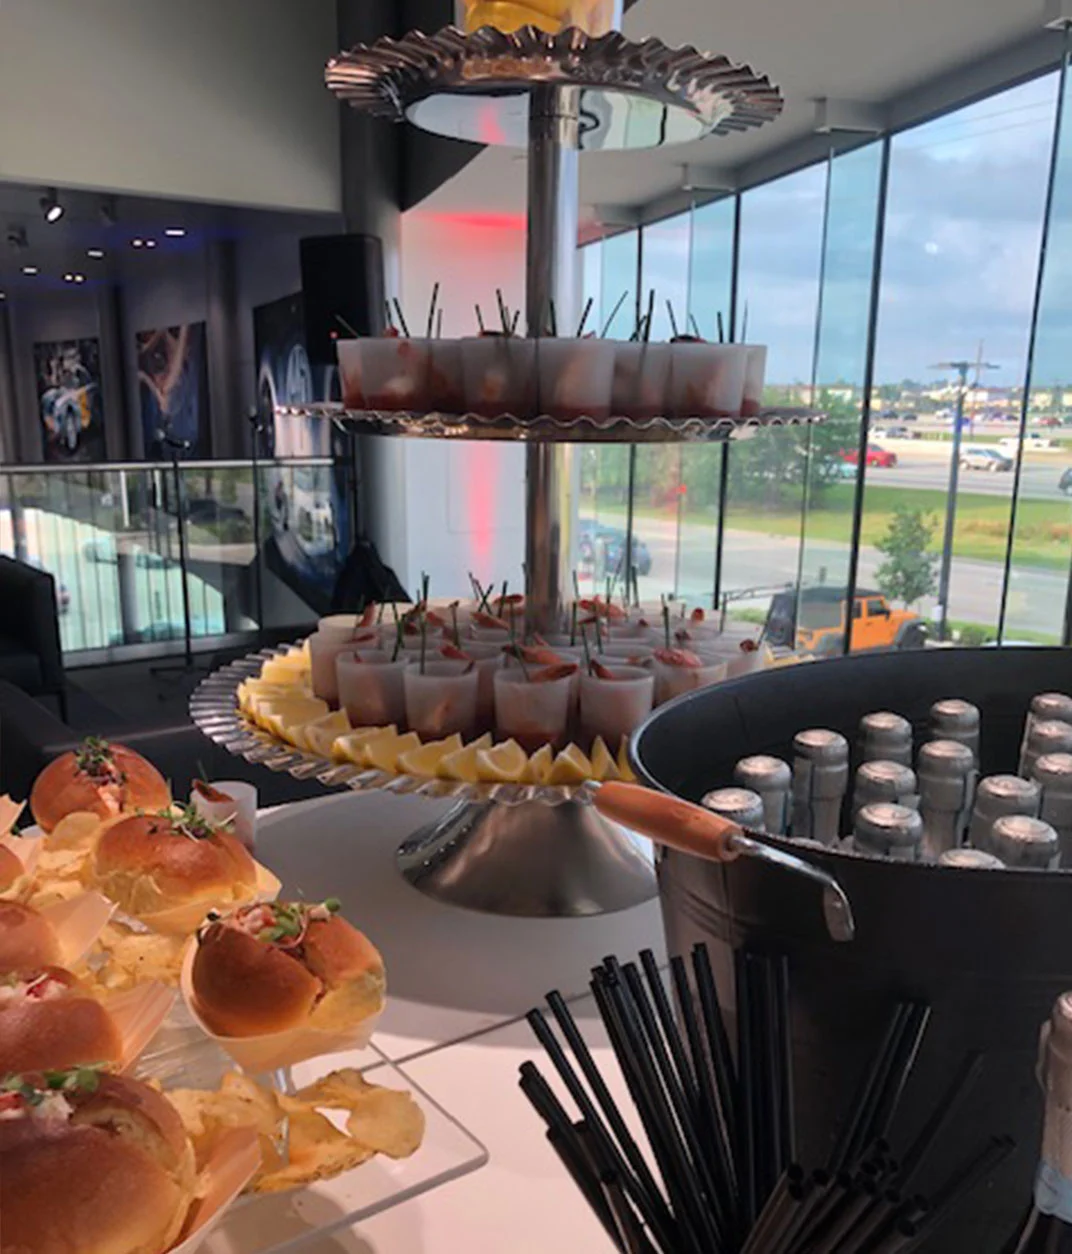 Catering display with appetizers at an event venue.